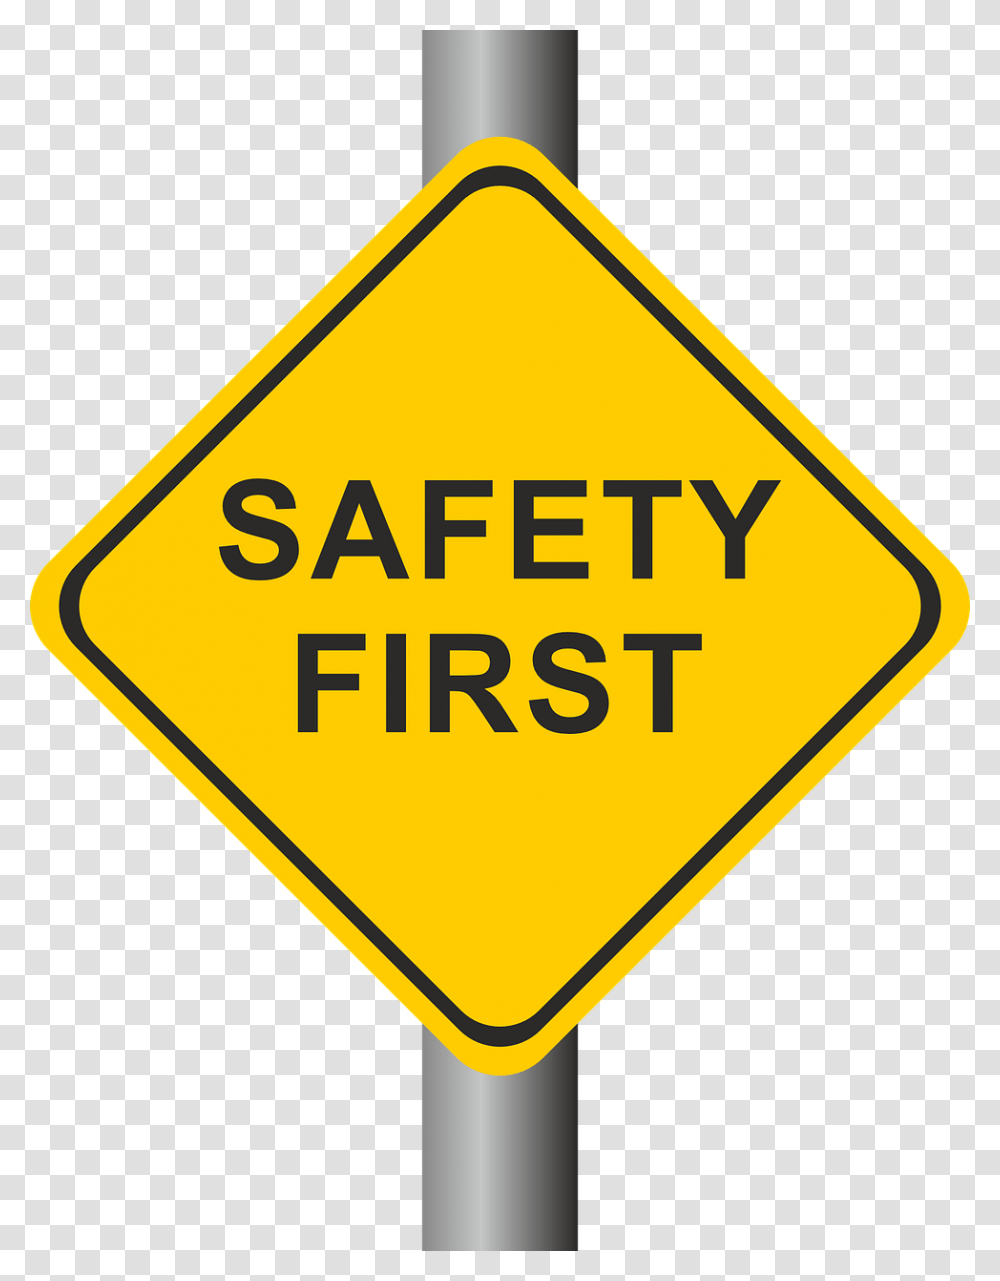 Just Like With Other Sports Safety Should Play, Road Sign, Stopsign Transparent Png